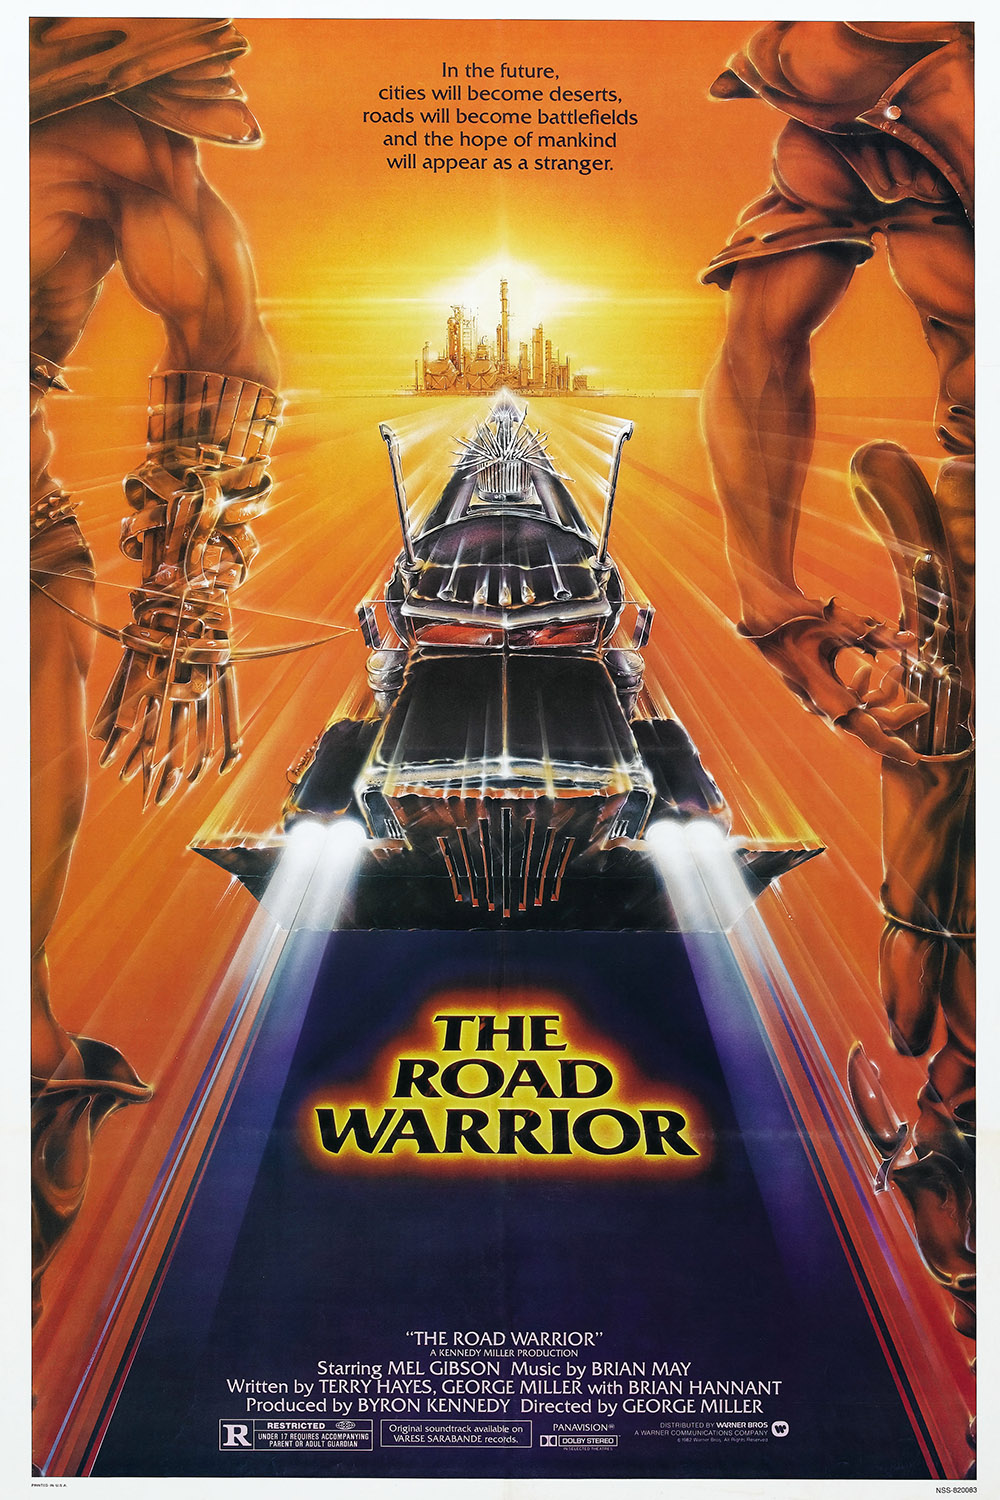 The Road Warrior (1982) Poster